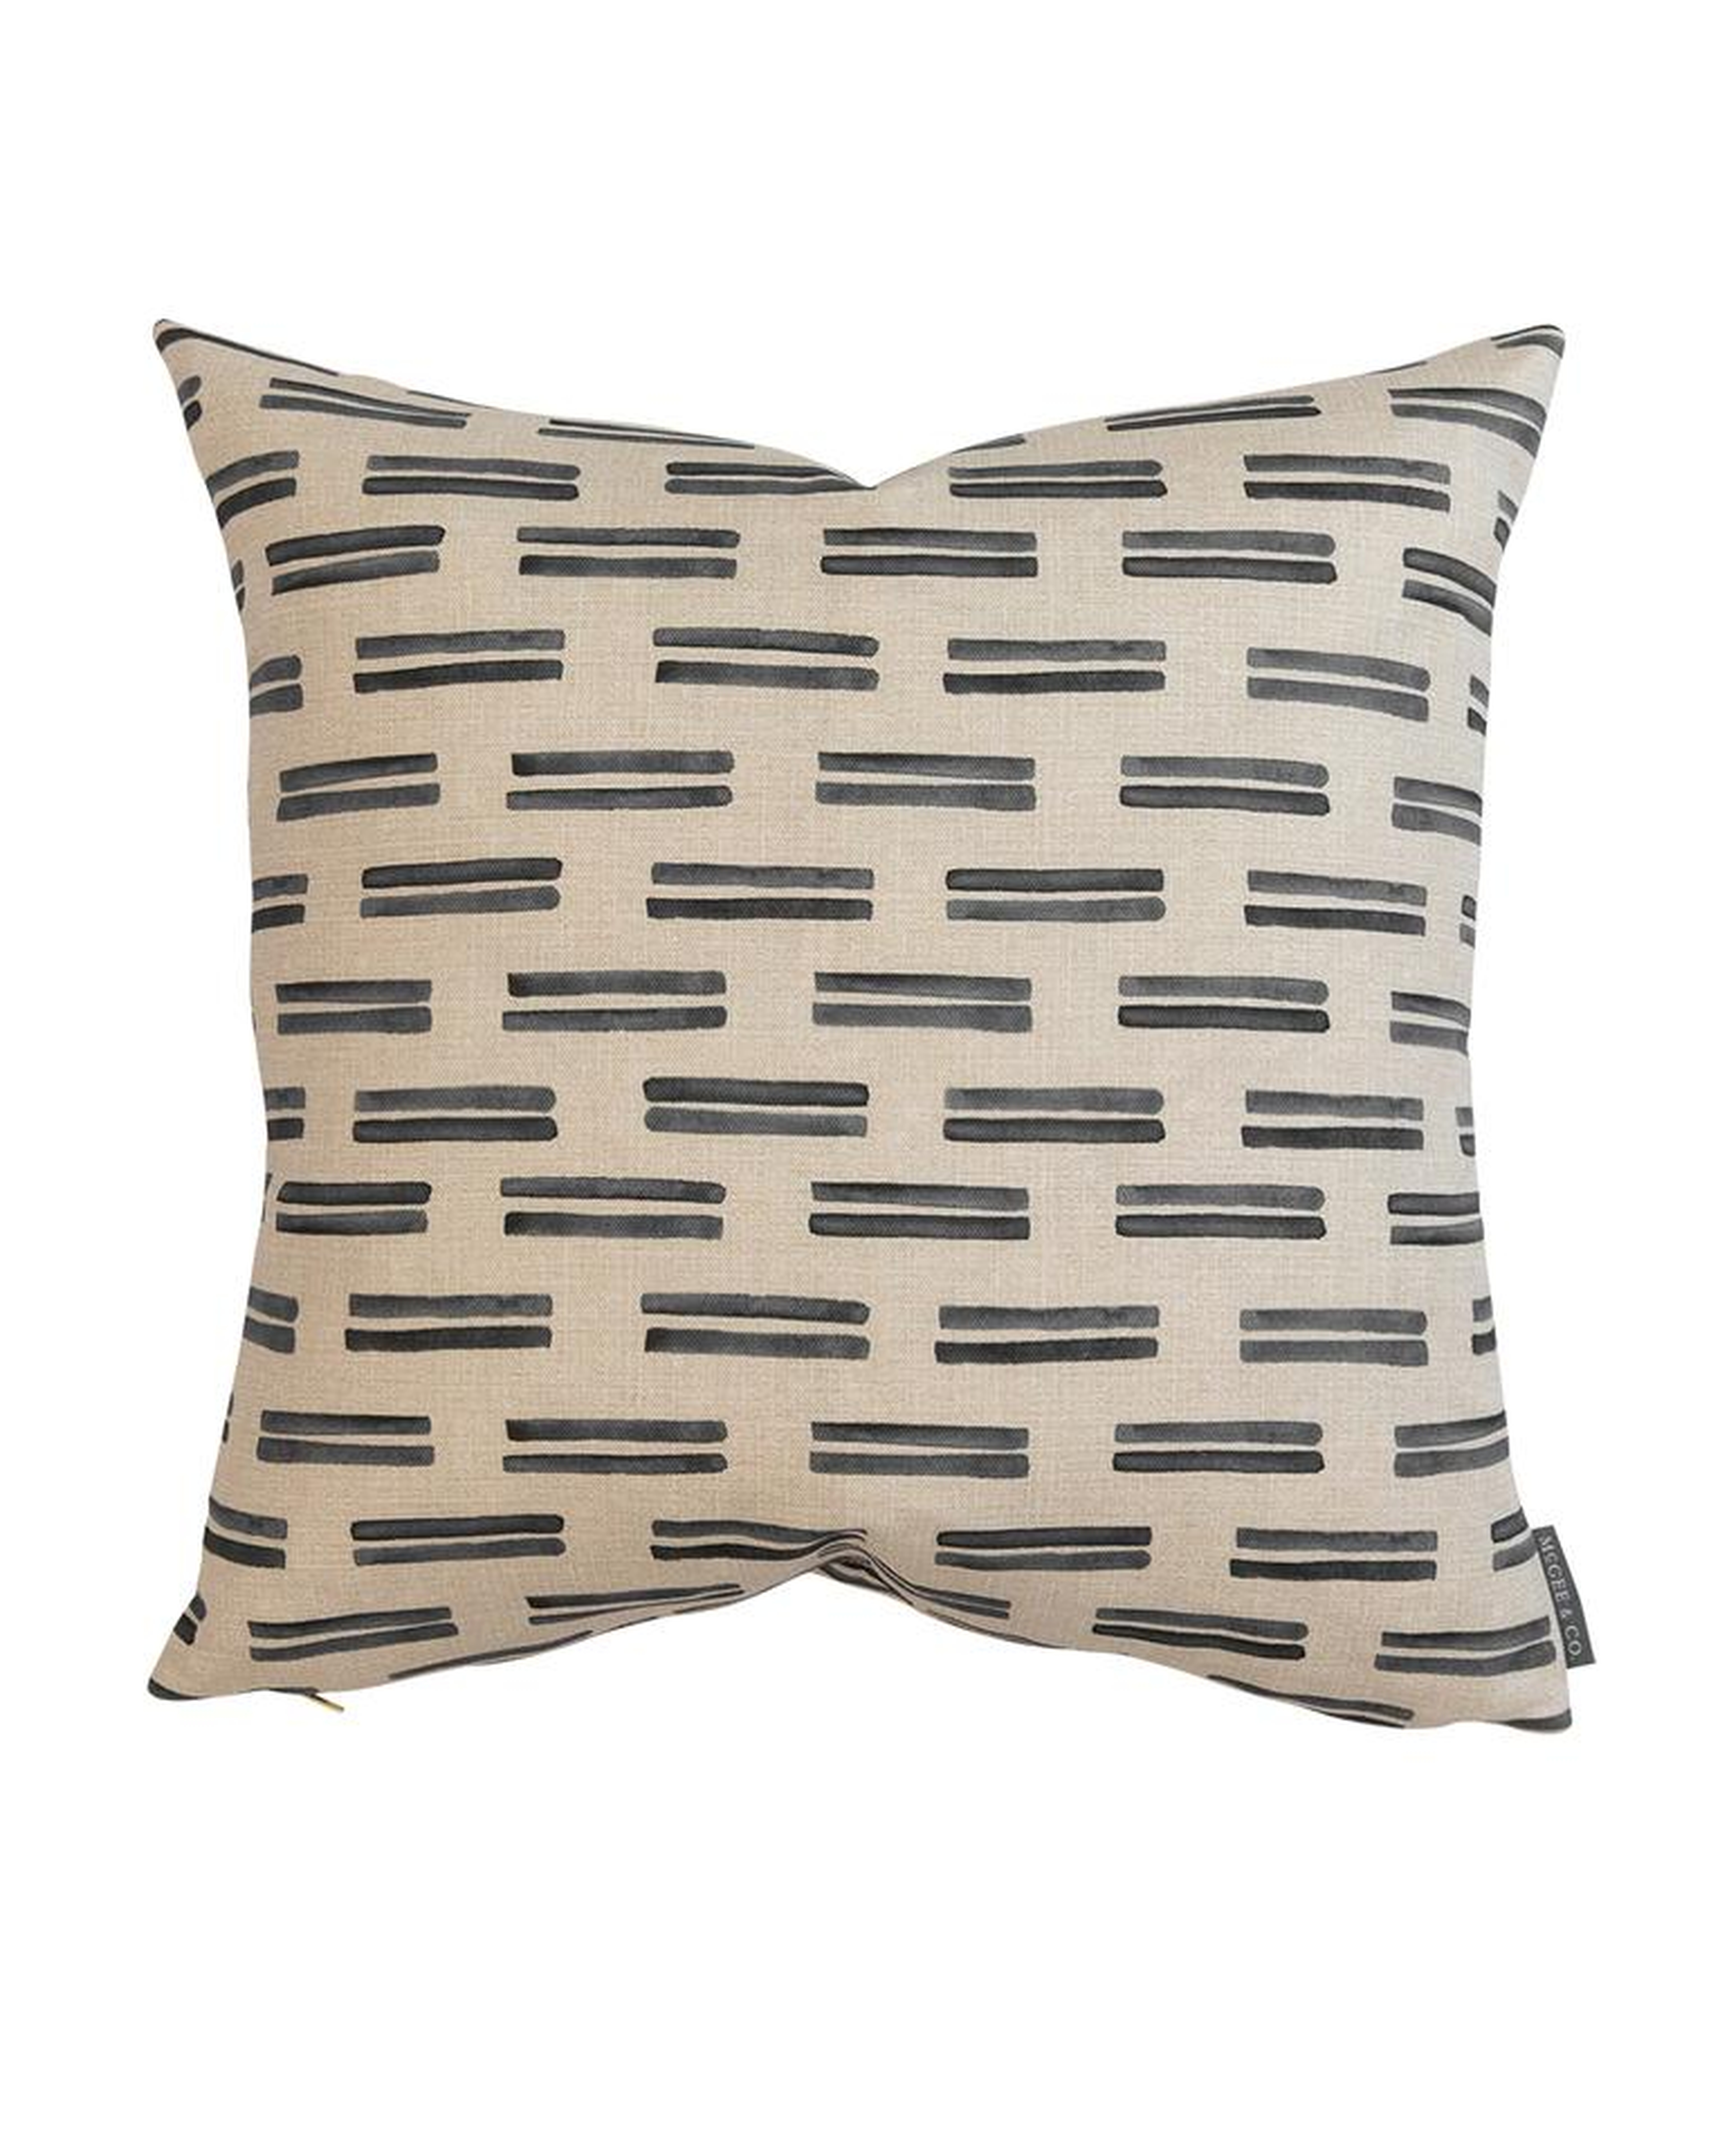 AVERY DOUBLE STRIPE PILLOW COVER - Gray, 24" x 24" - McGee & Co.